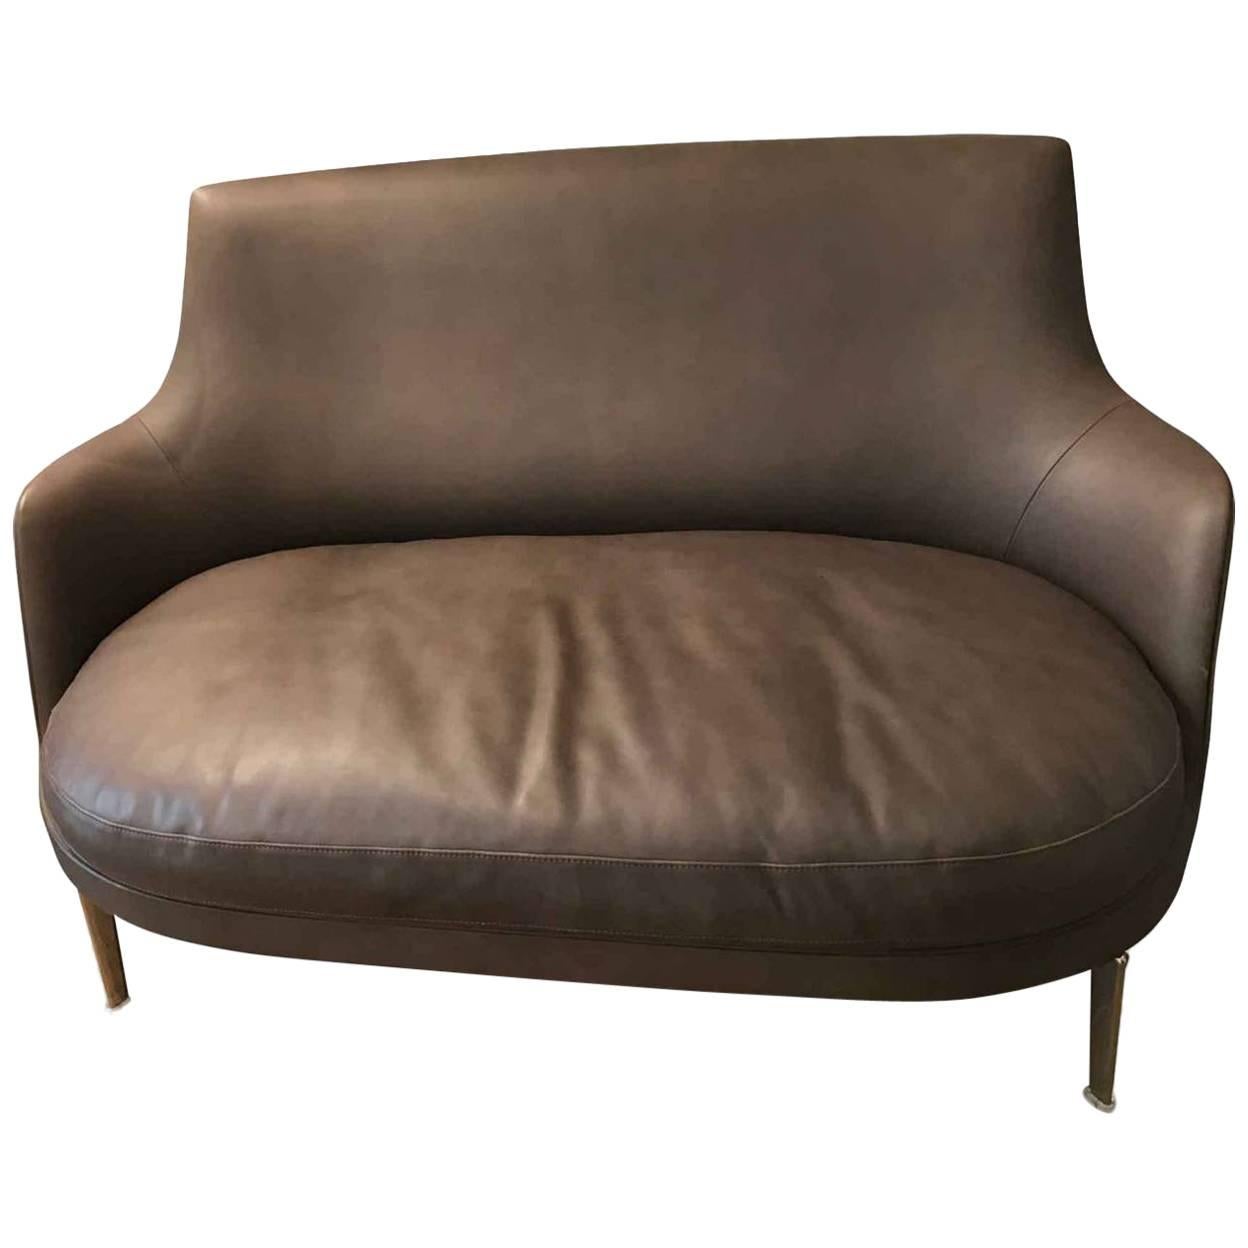 Sofa "Guisco" by Manufacturer Flexform in 100% Genuine Leather and Metal For Sale